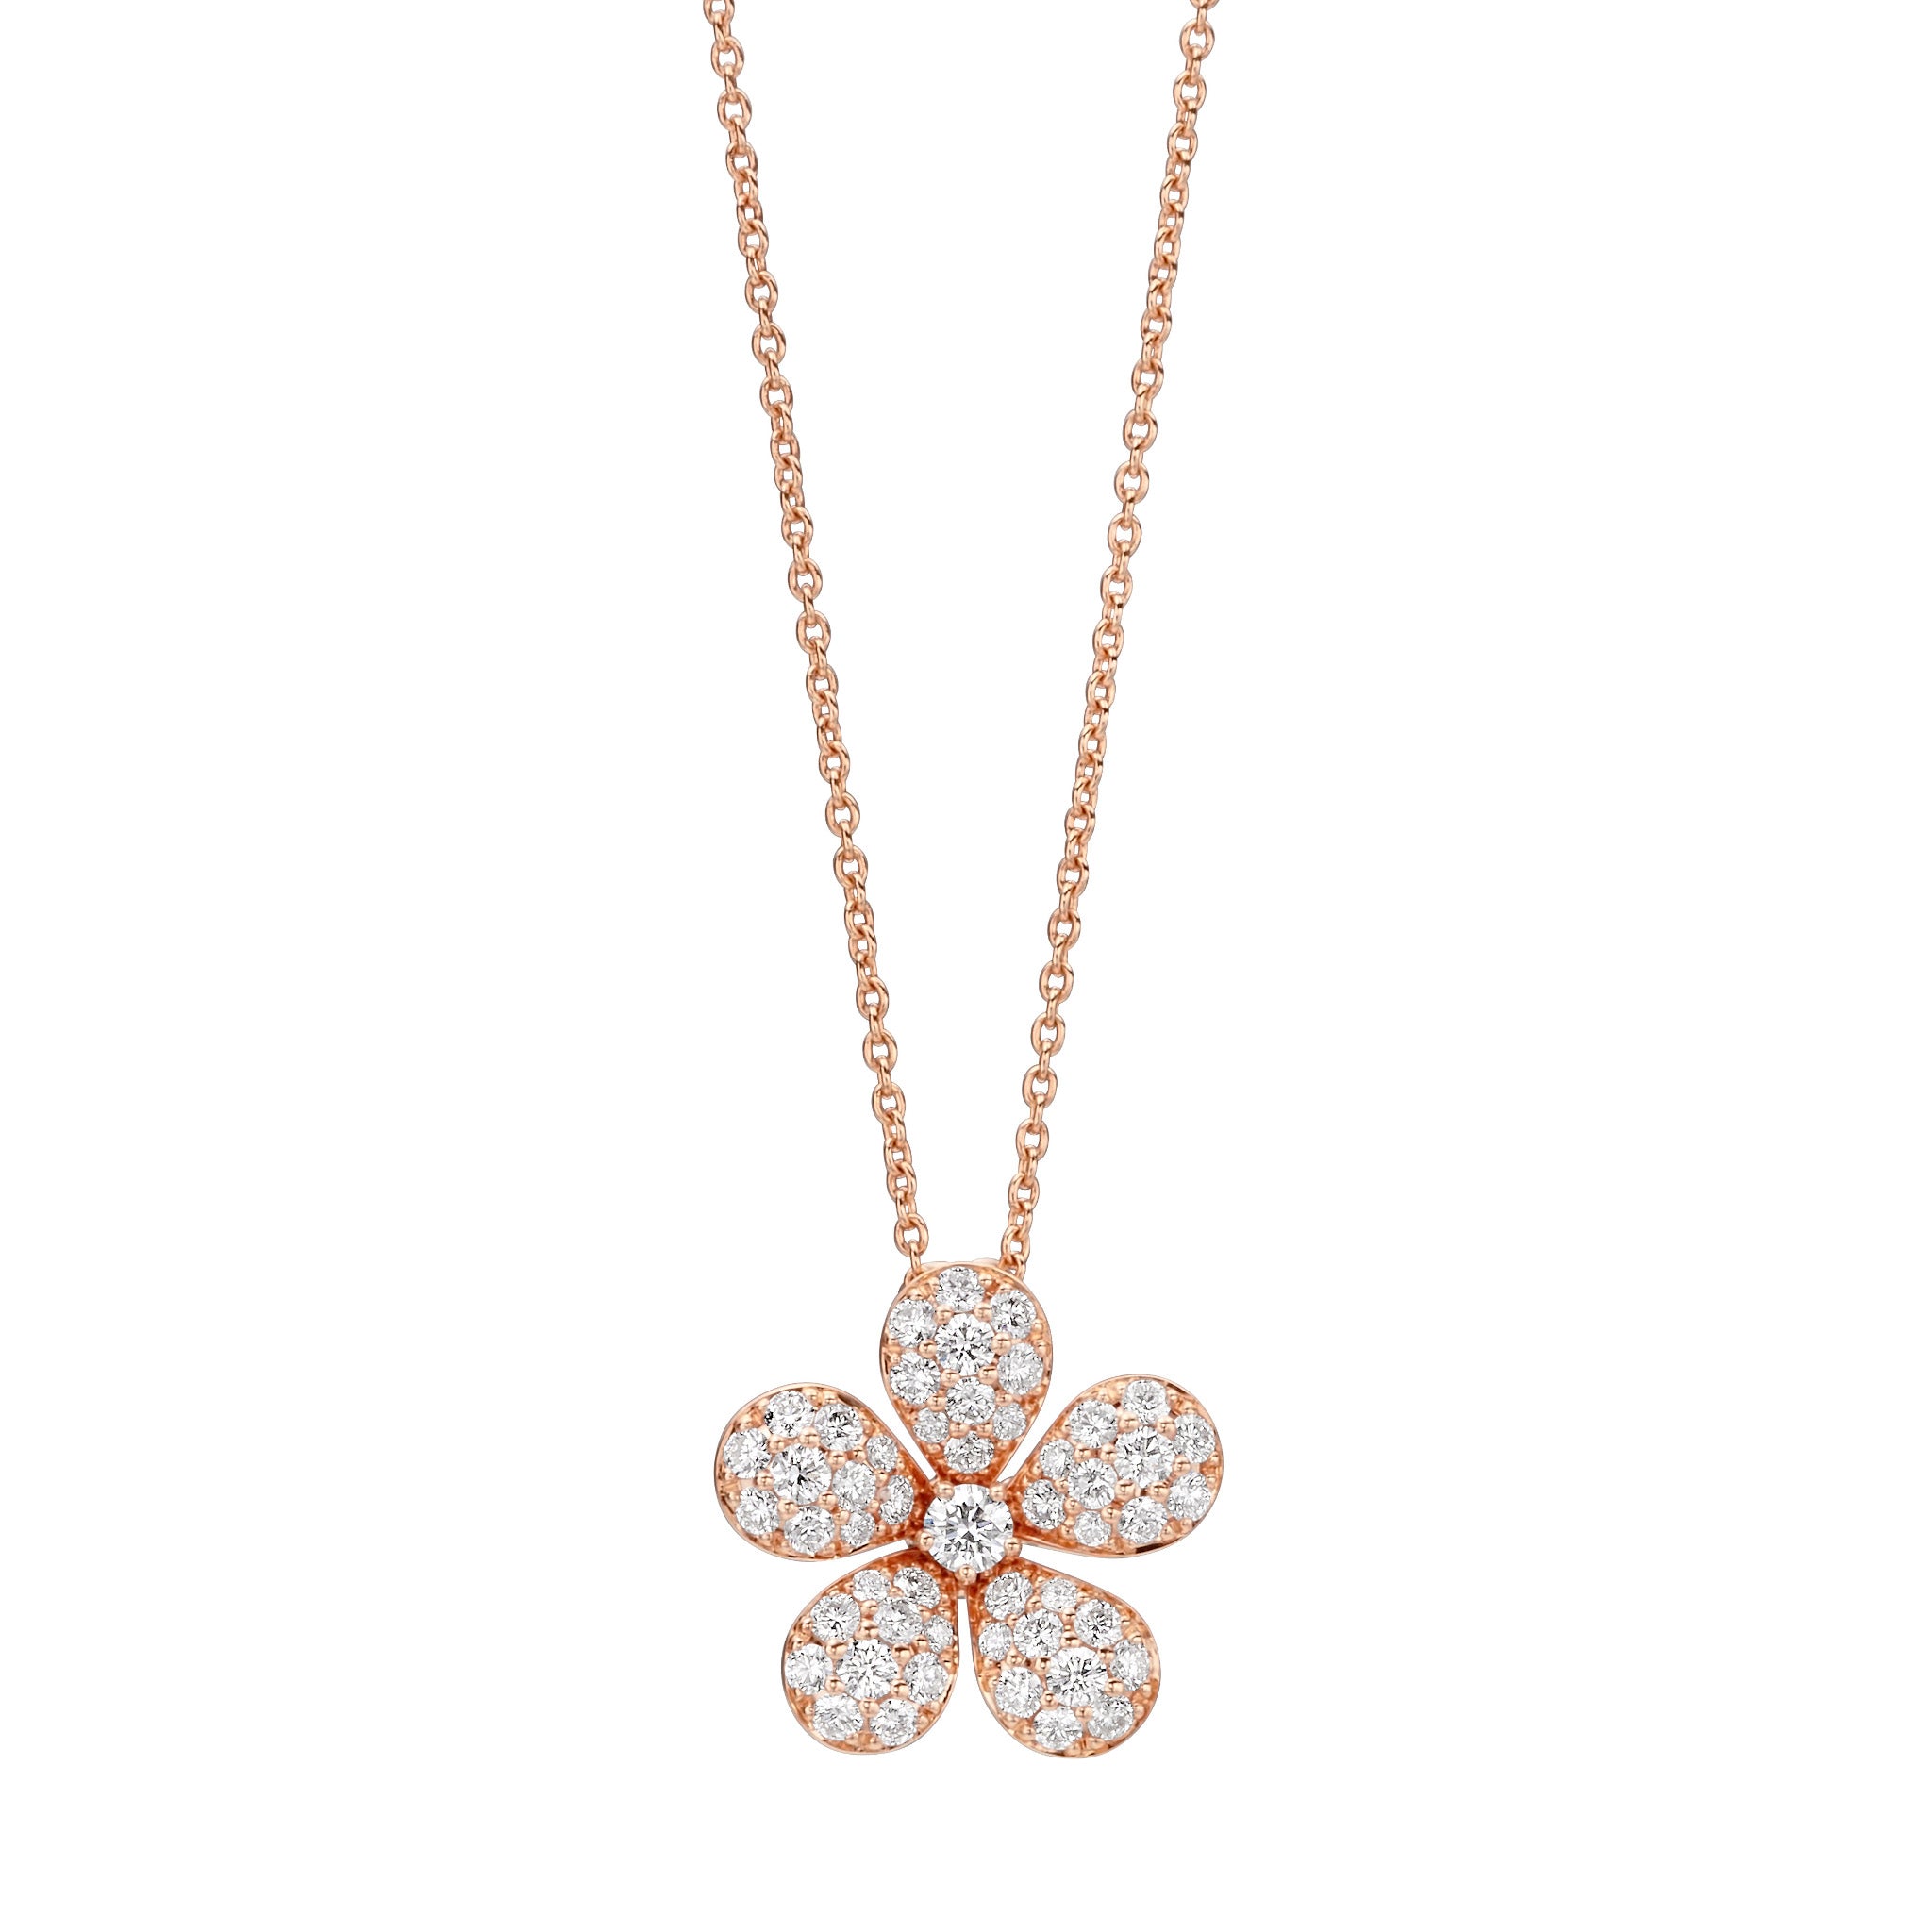 Diamond Floral Pendant Necklace in 18k Rose Gold